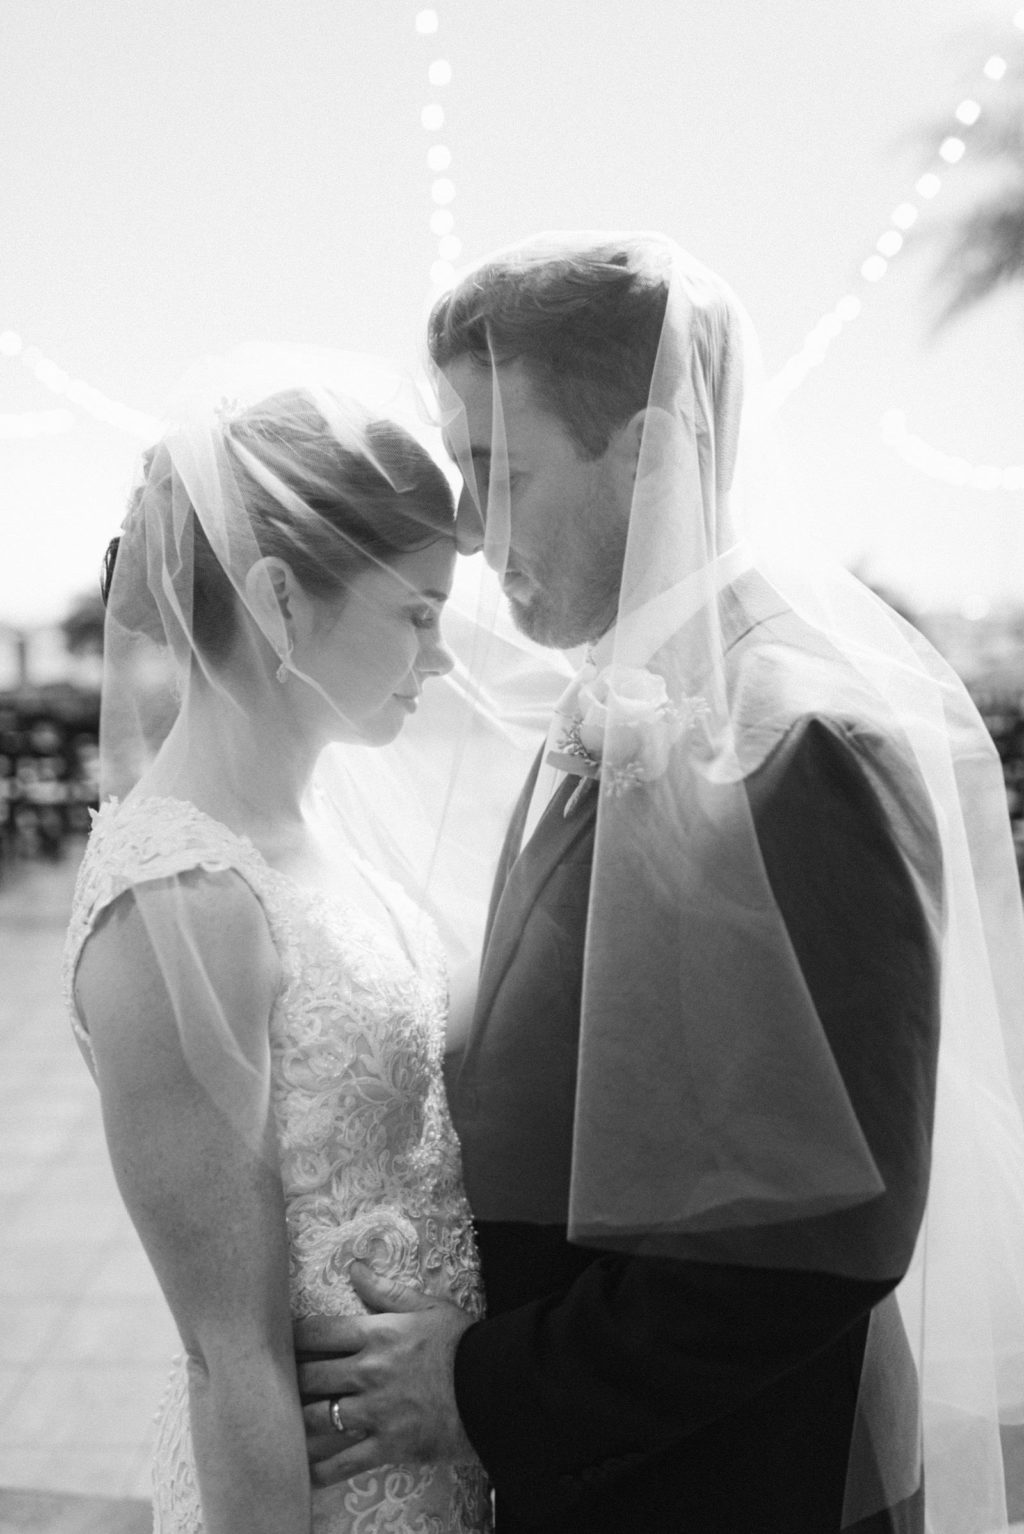 Romantic Intimate Black and White Portrait of Bride and Groom Under Wedding Veil